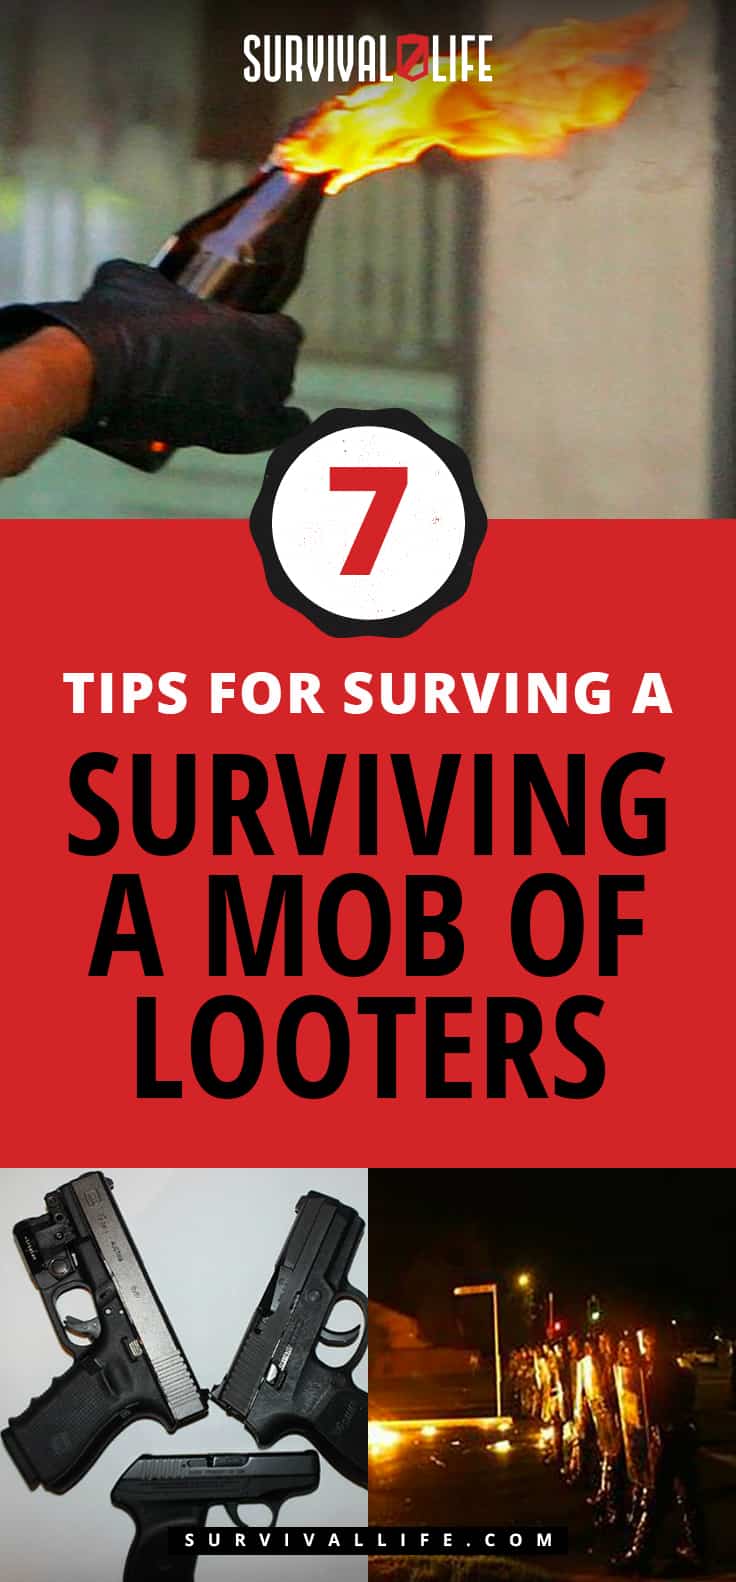 Tips For Surviving A Mob Of Looters | https://survivallife.com/7-tips-for-surviving-a-mob-of-looters-2/